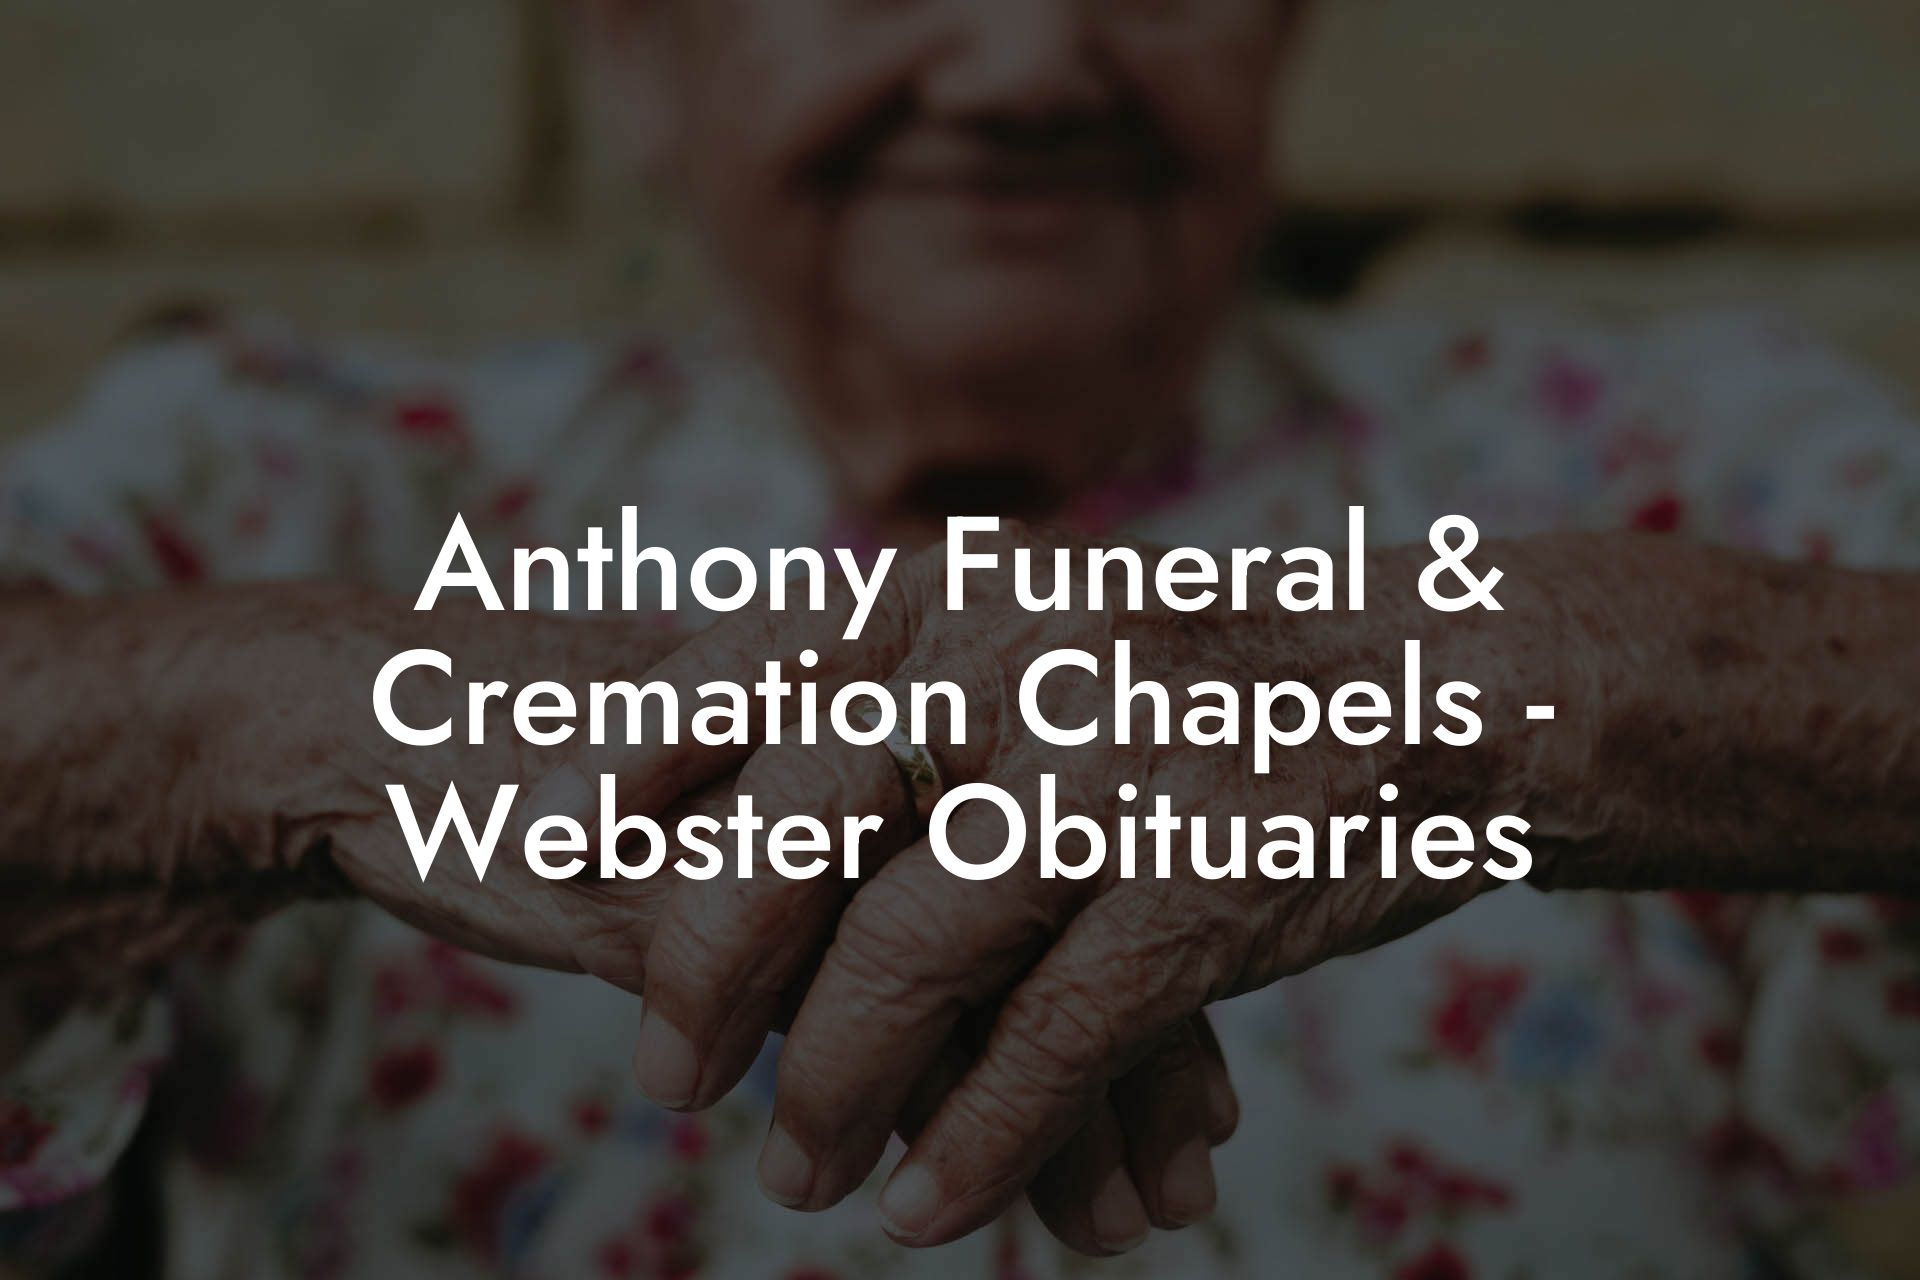 Anthony Funeral & Cremation Chapels - Webster Obituaries